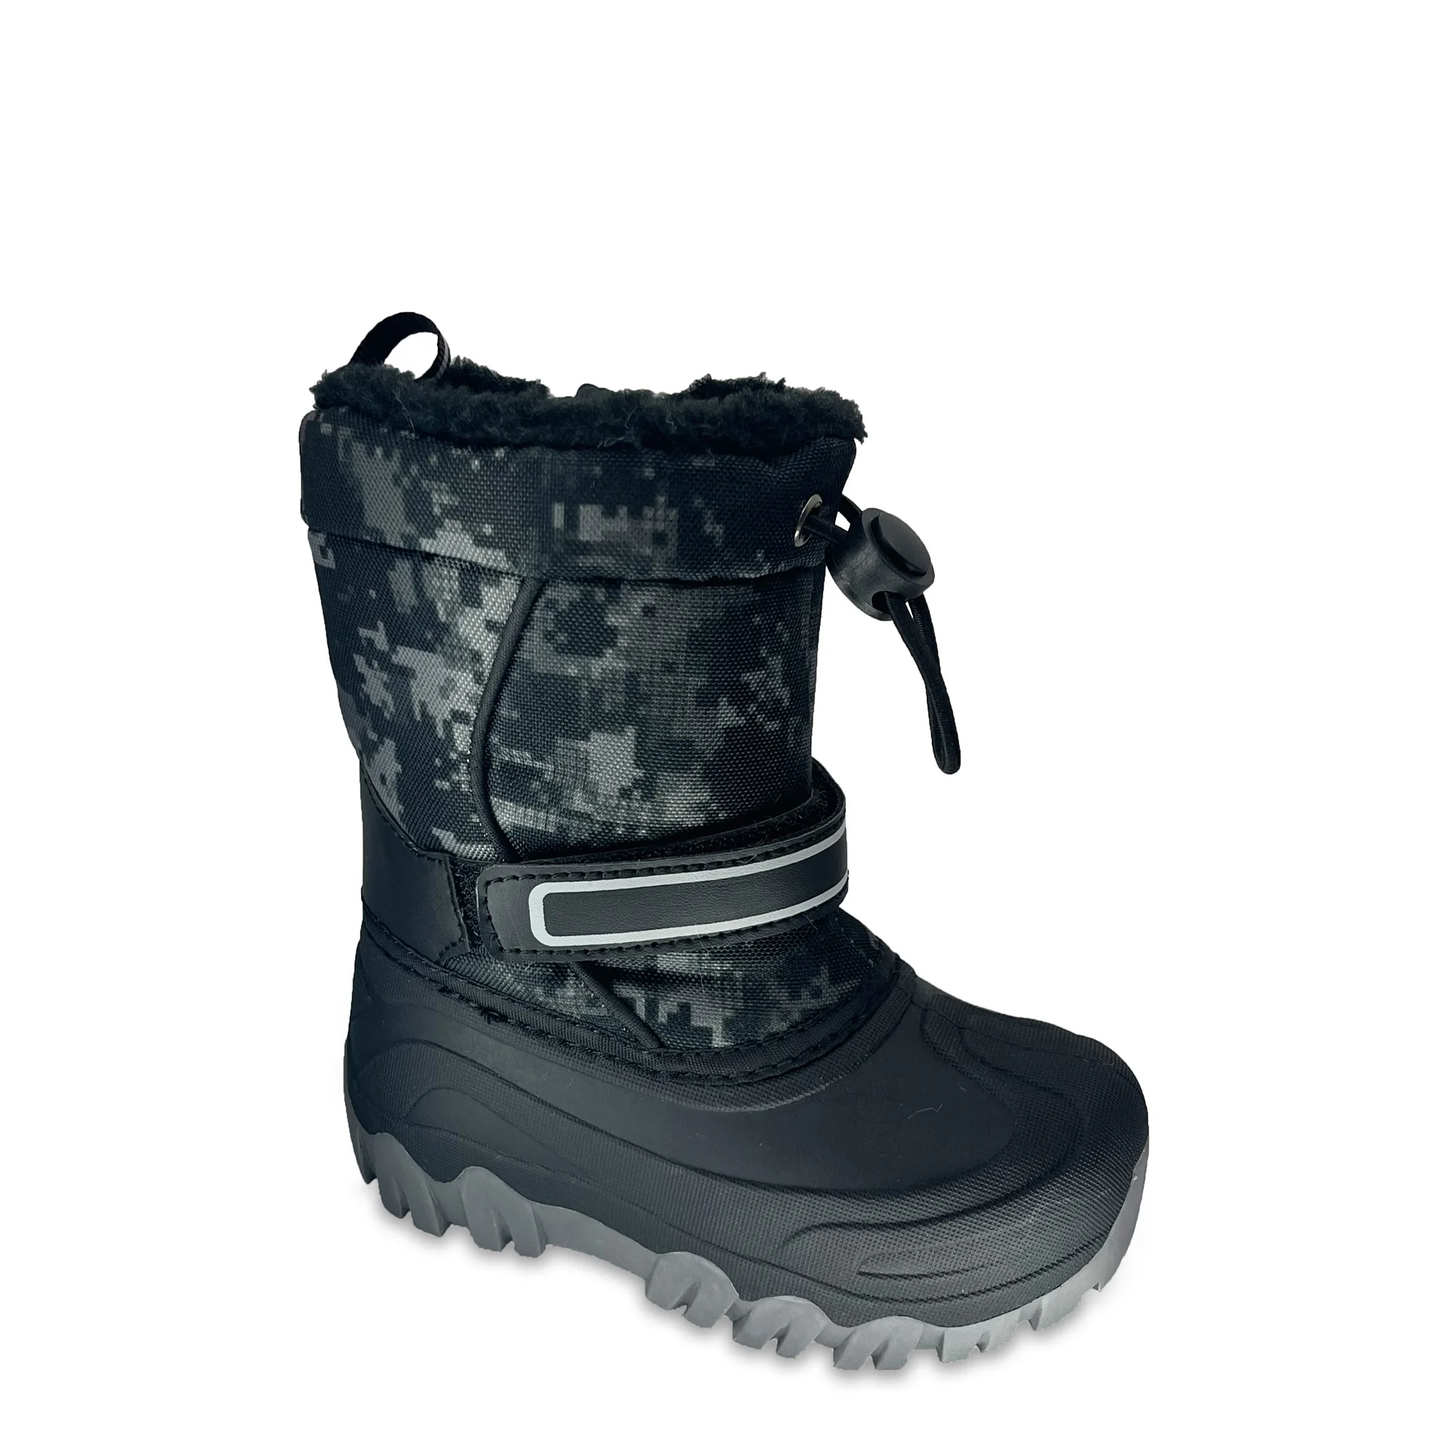 Toddler & Kids Hook-And-Loop Closure Snow Boots